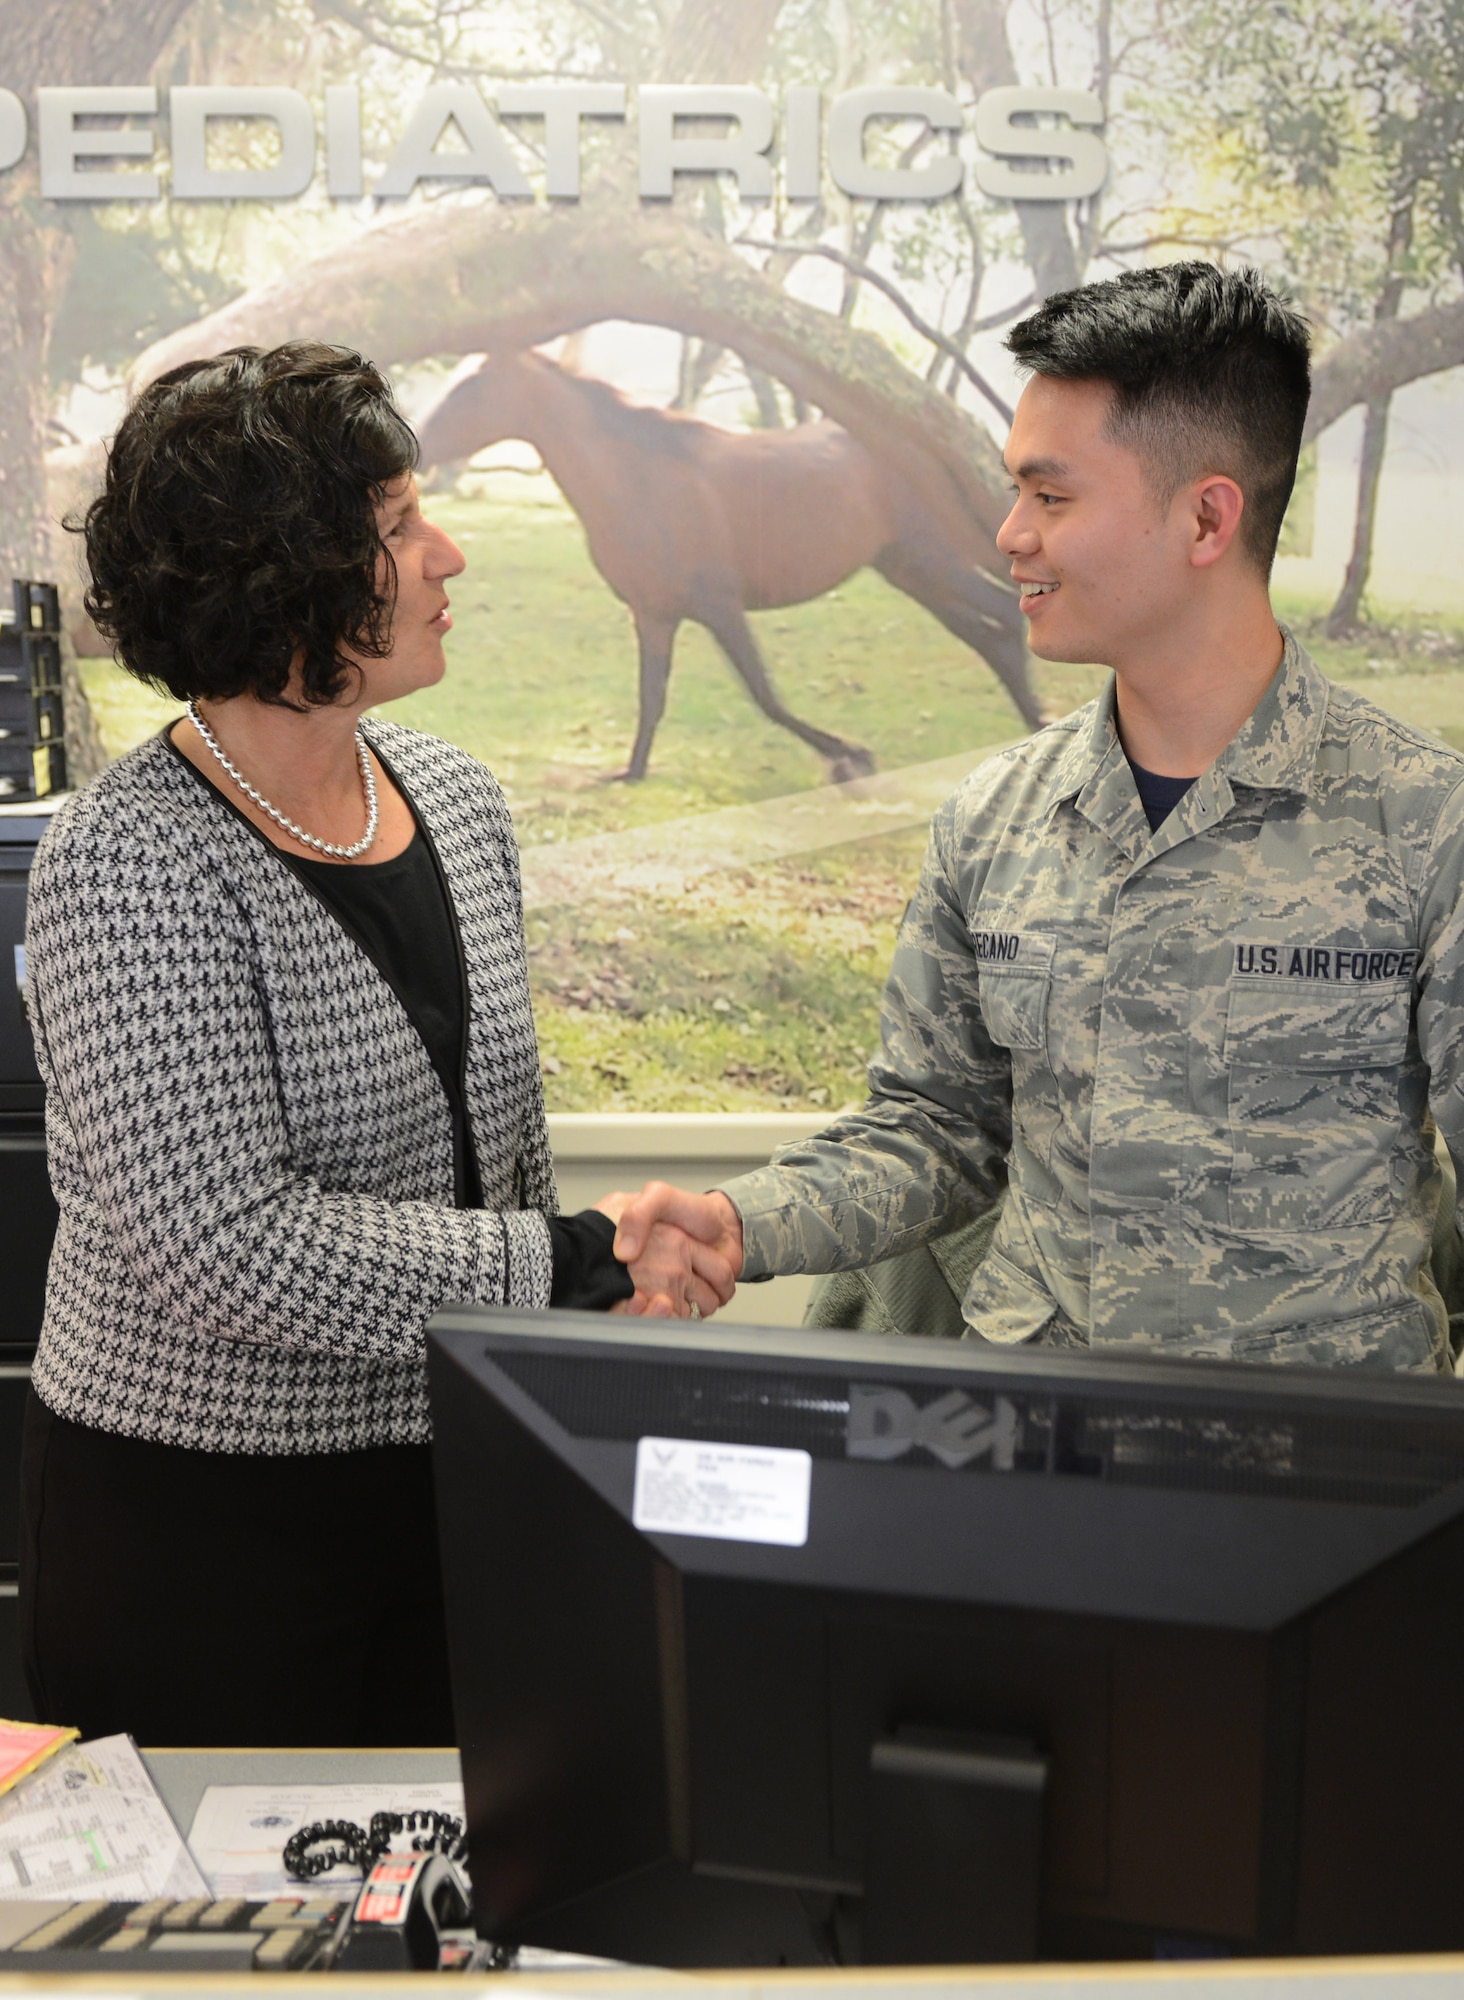 Morro is greeted by Senior Airman Jan Ronel Recano, 78th Medical Operations Squadron technician, during the facility tour. (U.S. Air Force photo by Tommie Horton)